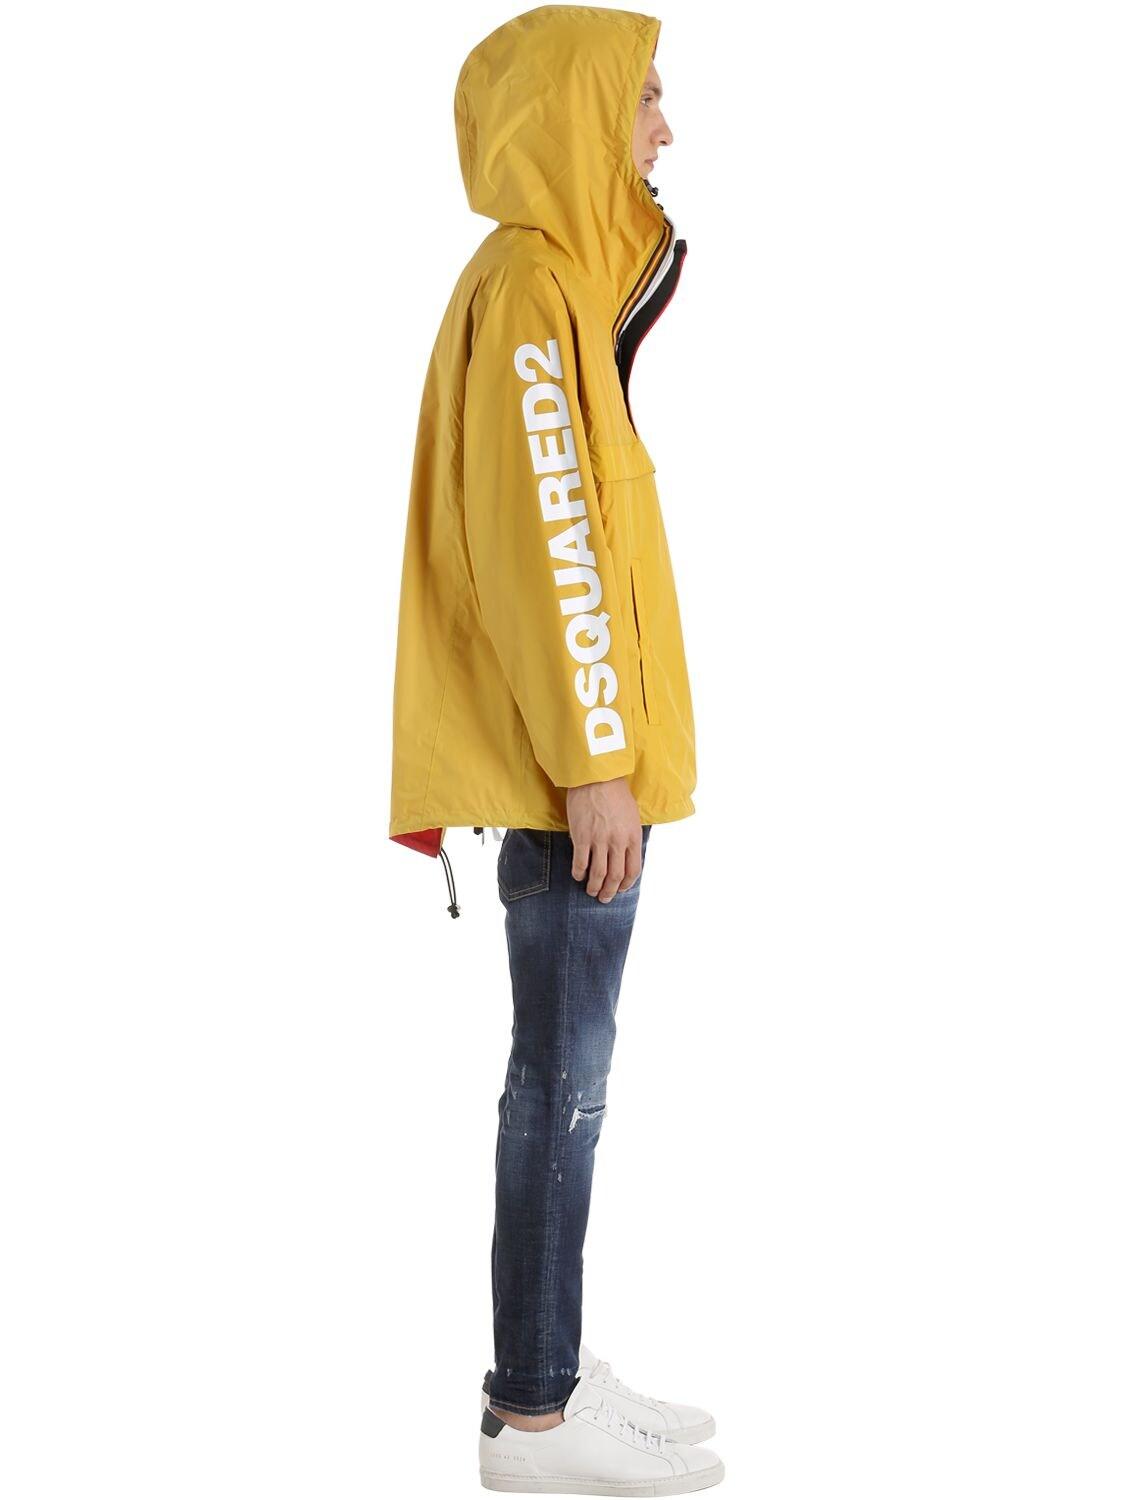 DSquared² Synthetic K-way Reversible Nylon Rain Jacket in Red/Yellow (Red)  for Men - Lyst